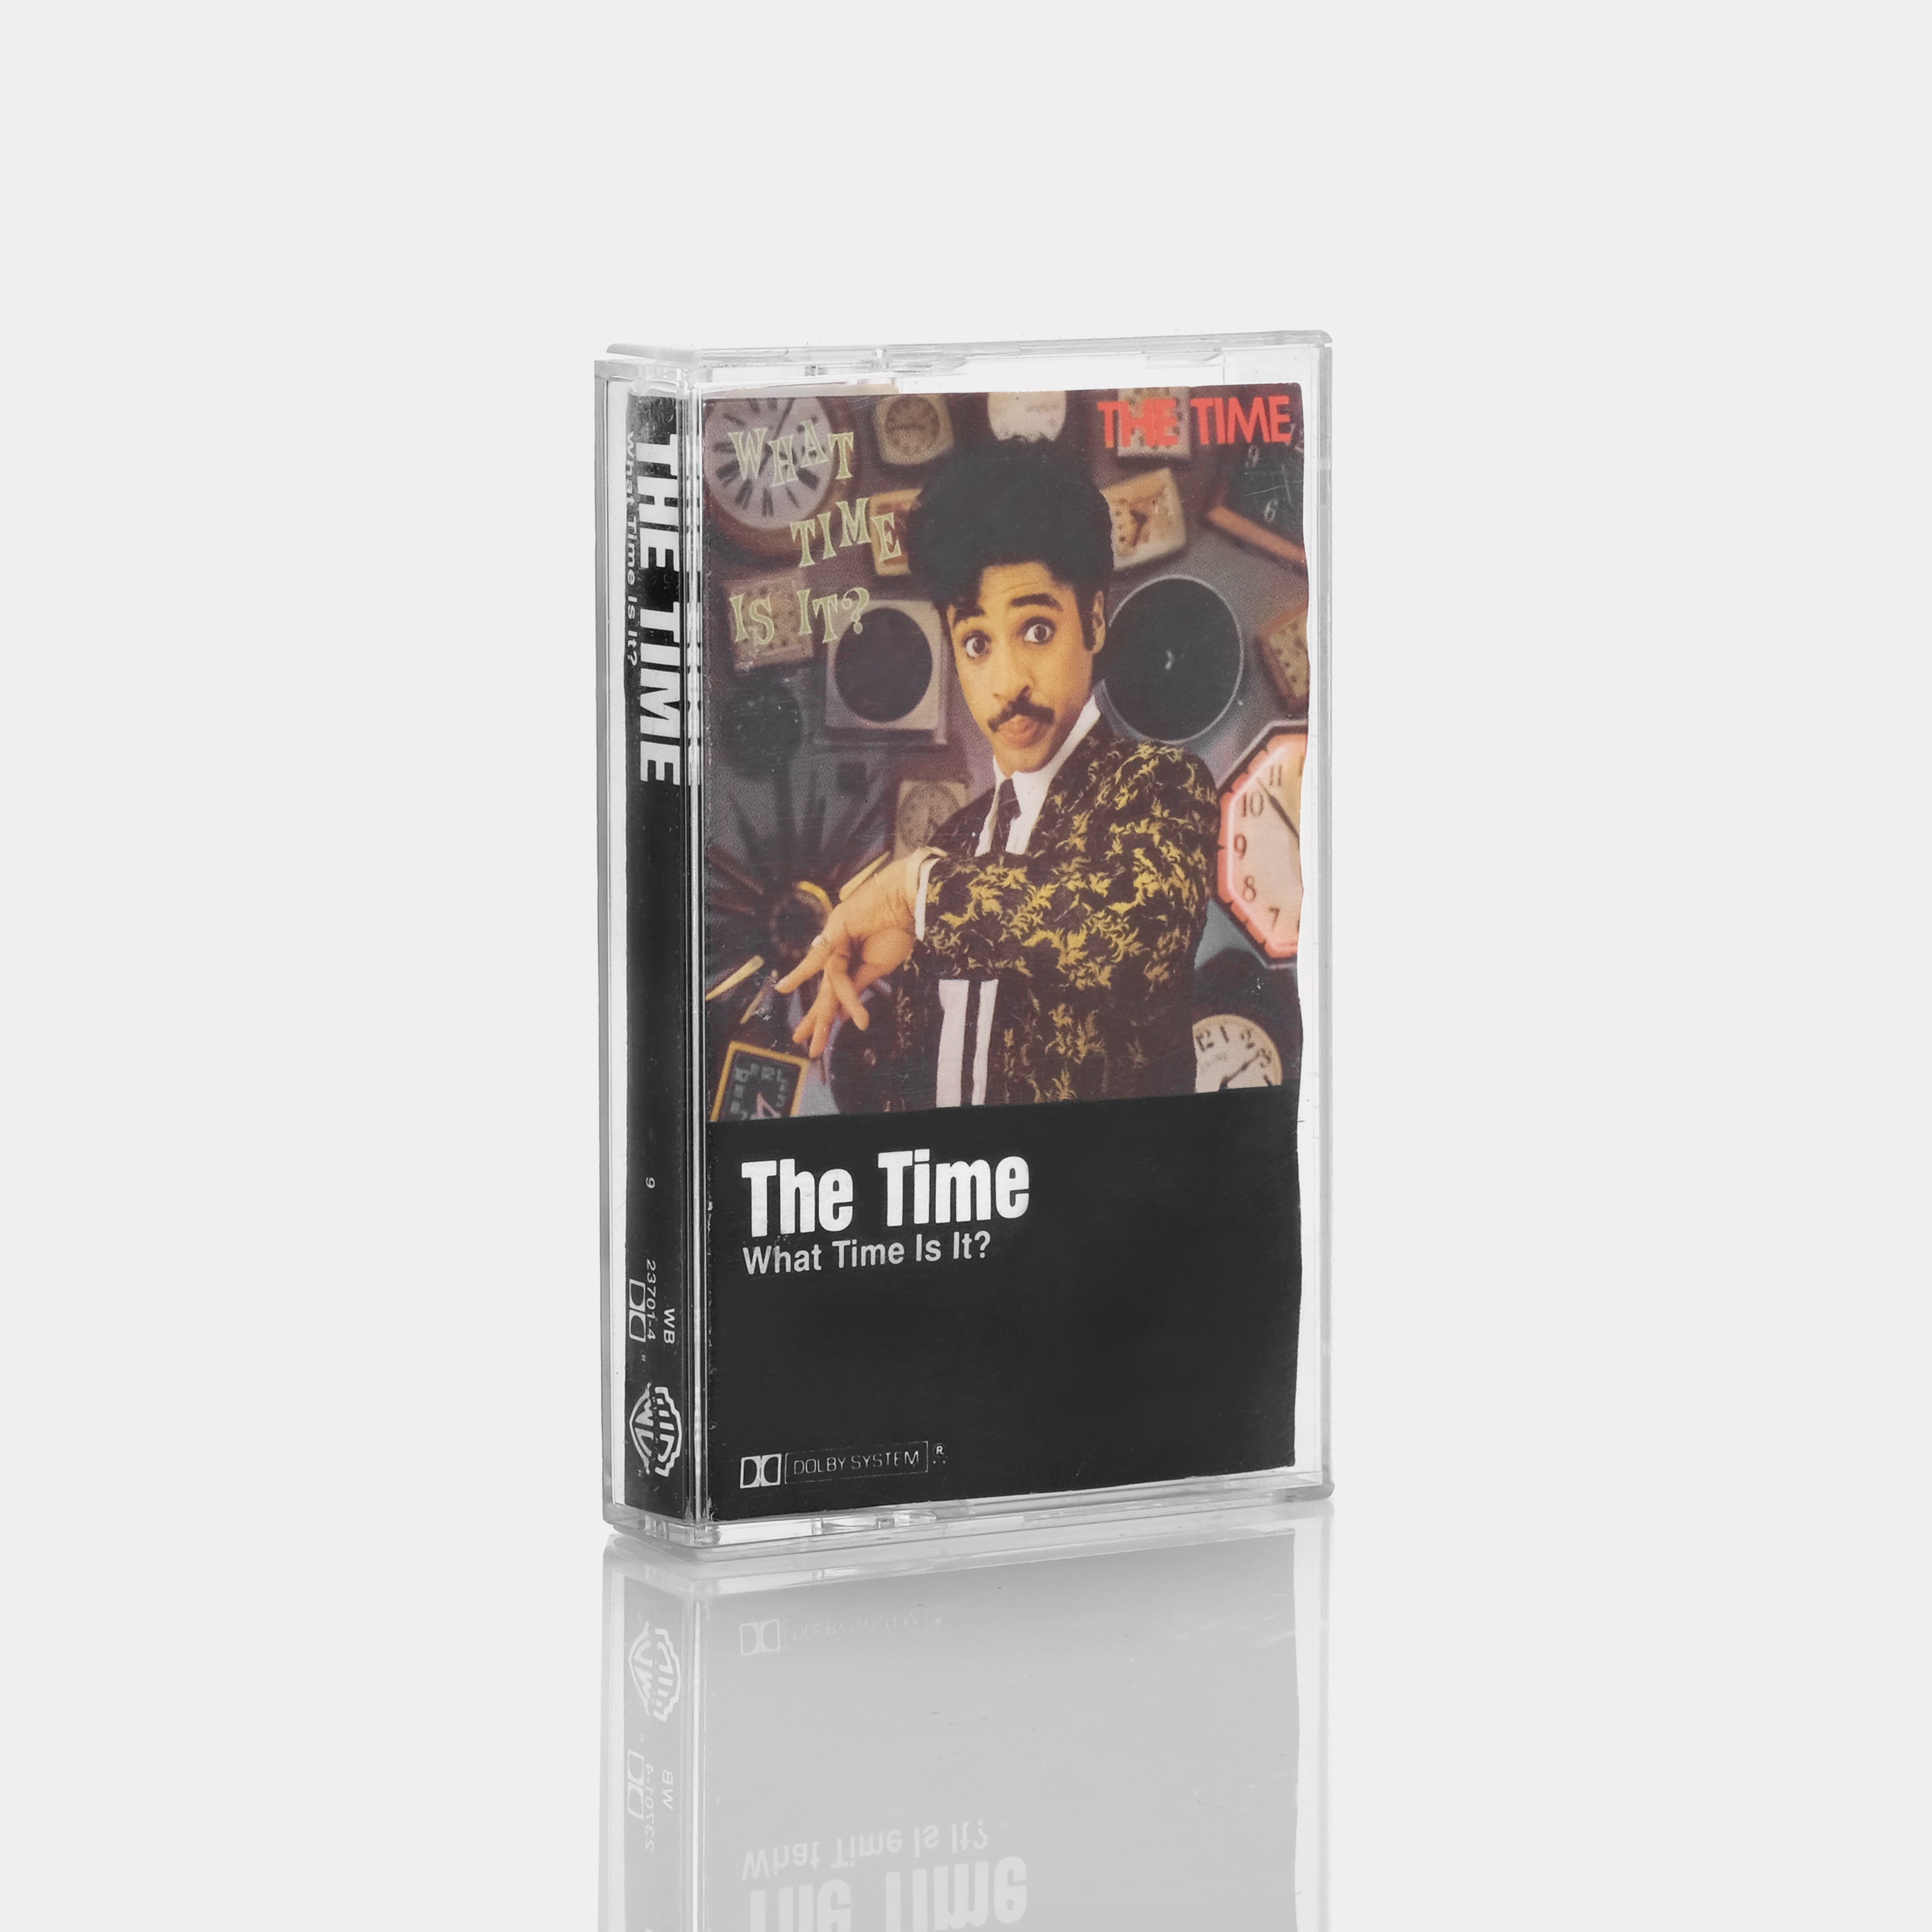 The Time - What Time Is It? Cassette Tape